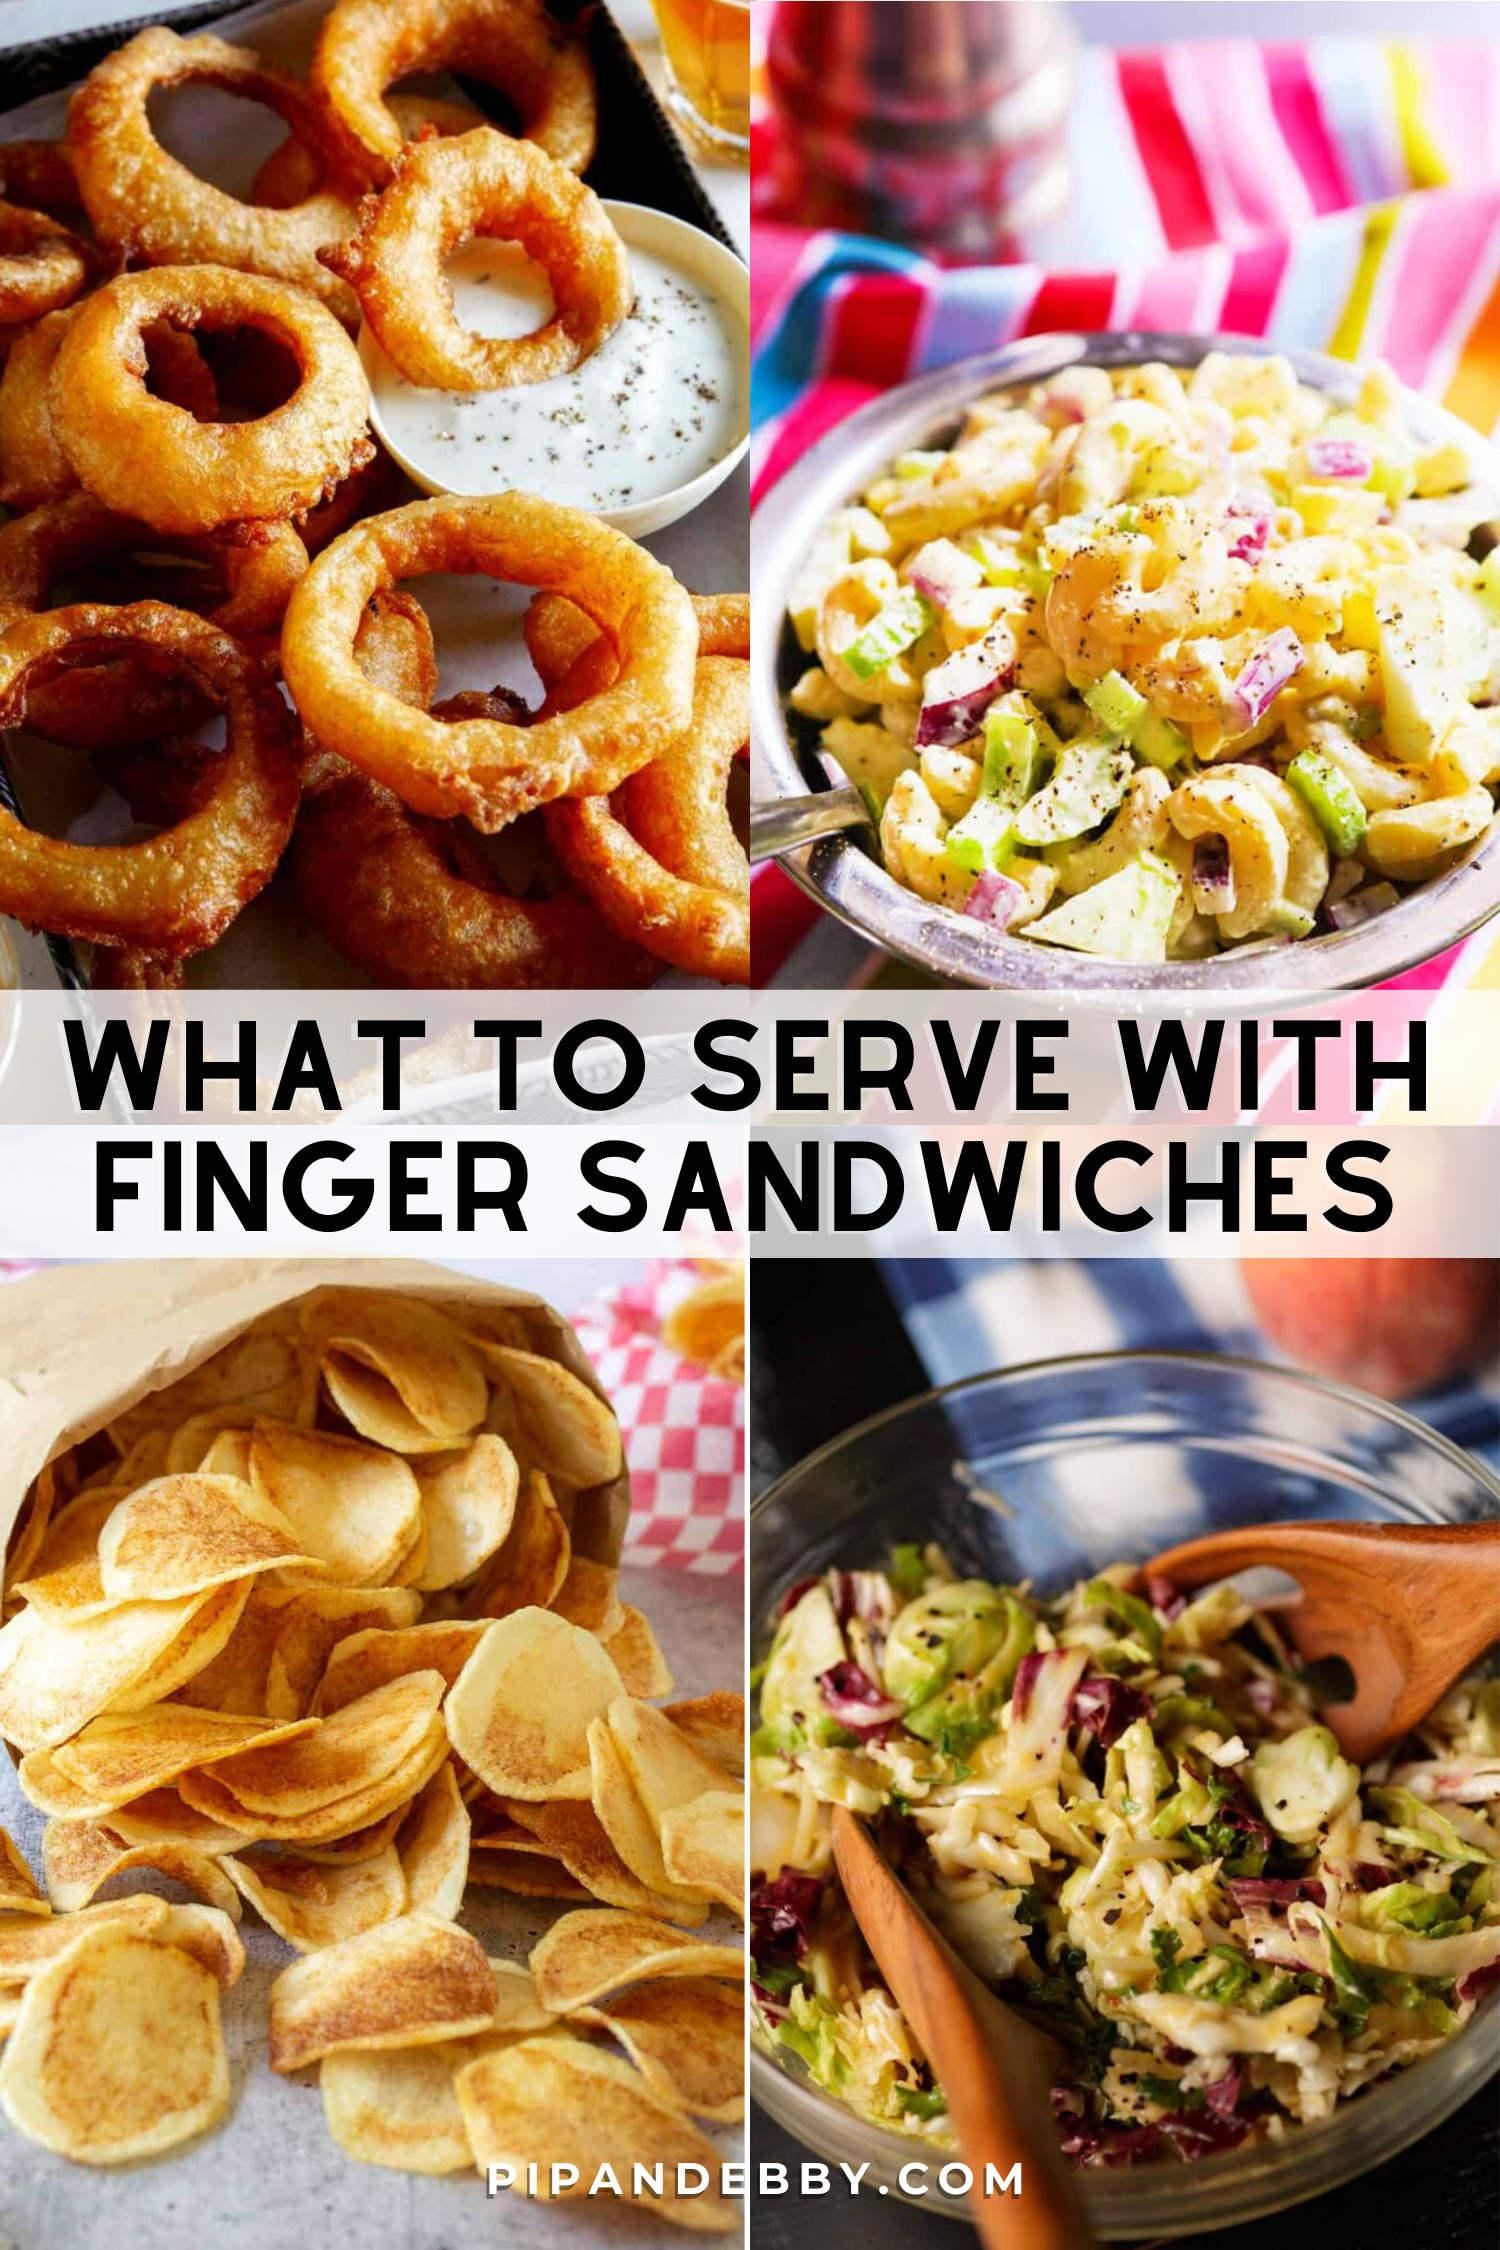 Four food photos in a grid with text overlay reading, "What to serve with finger sandwiches."